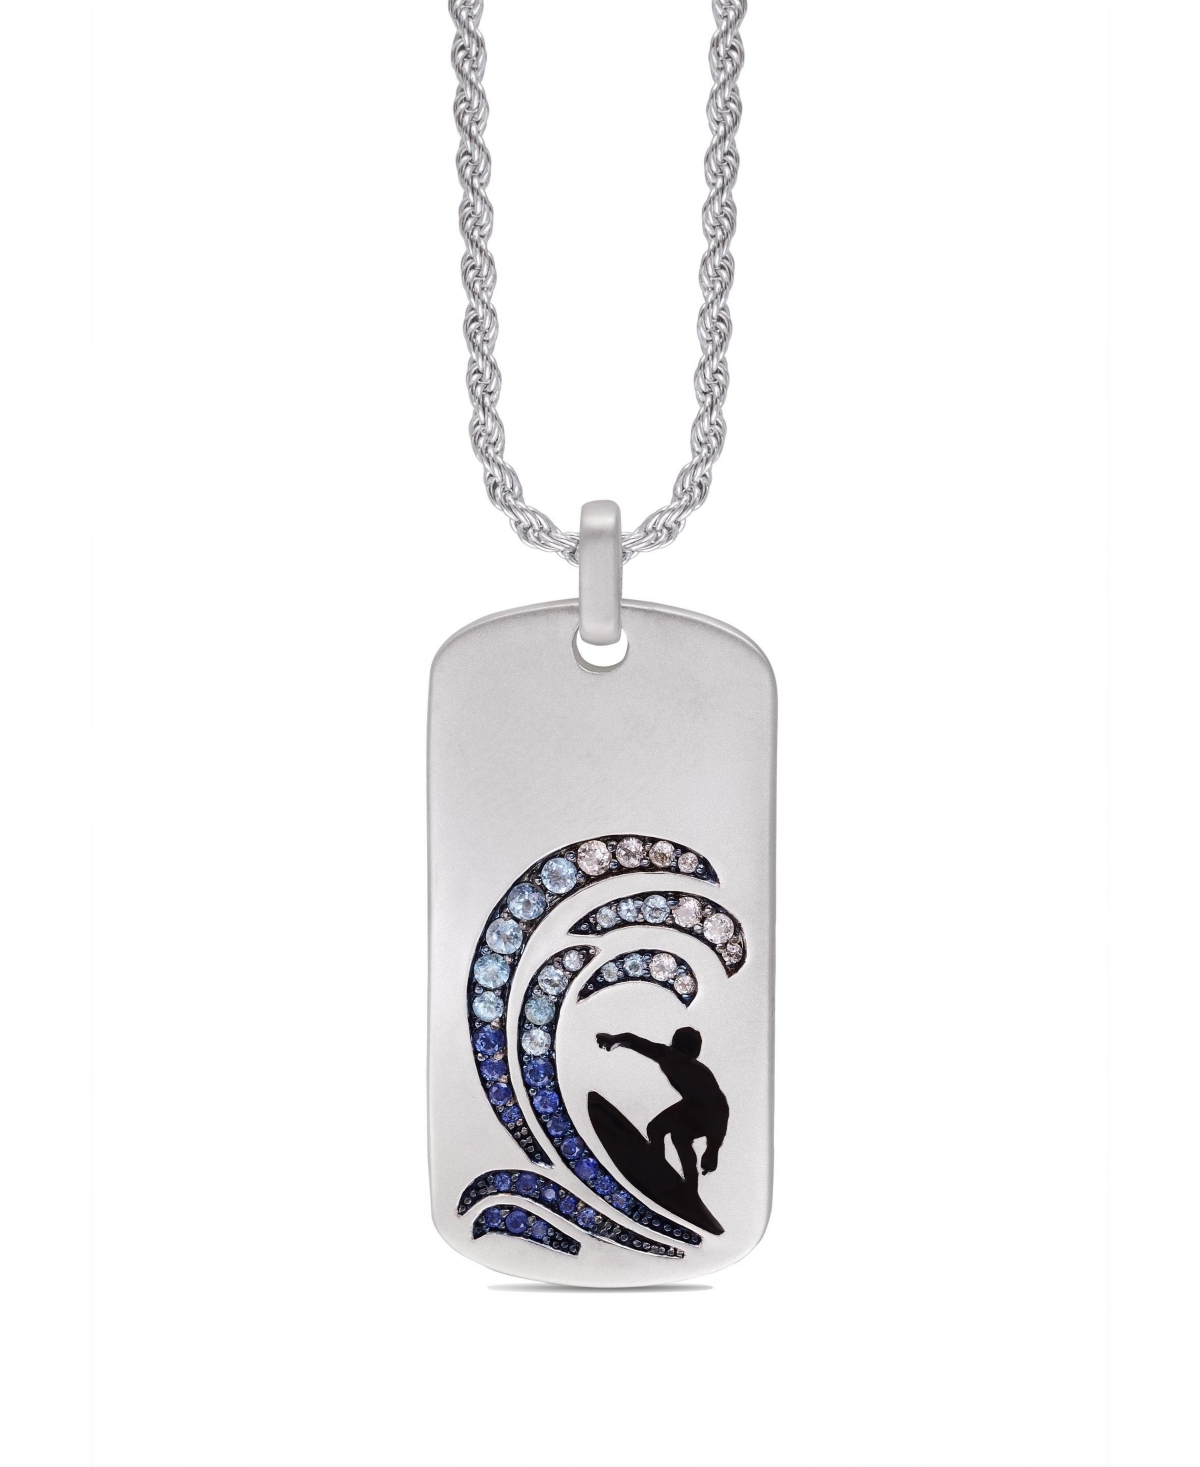 LUVMYJEWELRY STERLING SILVER SURFER'S PARADISE DESIGN BLUE SAPPHIRE, WHITE TOPAZ GEMSTONE TAG CHAIN